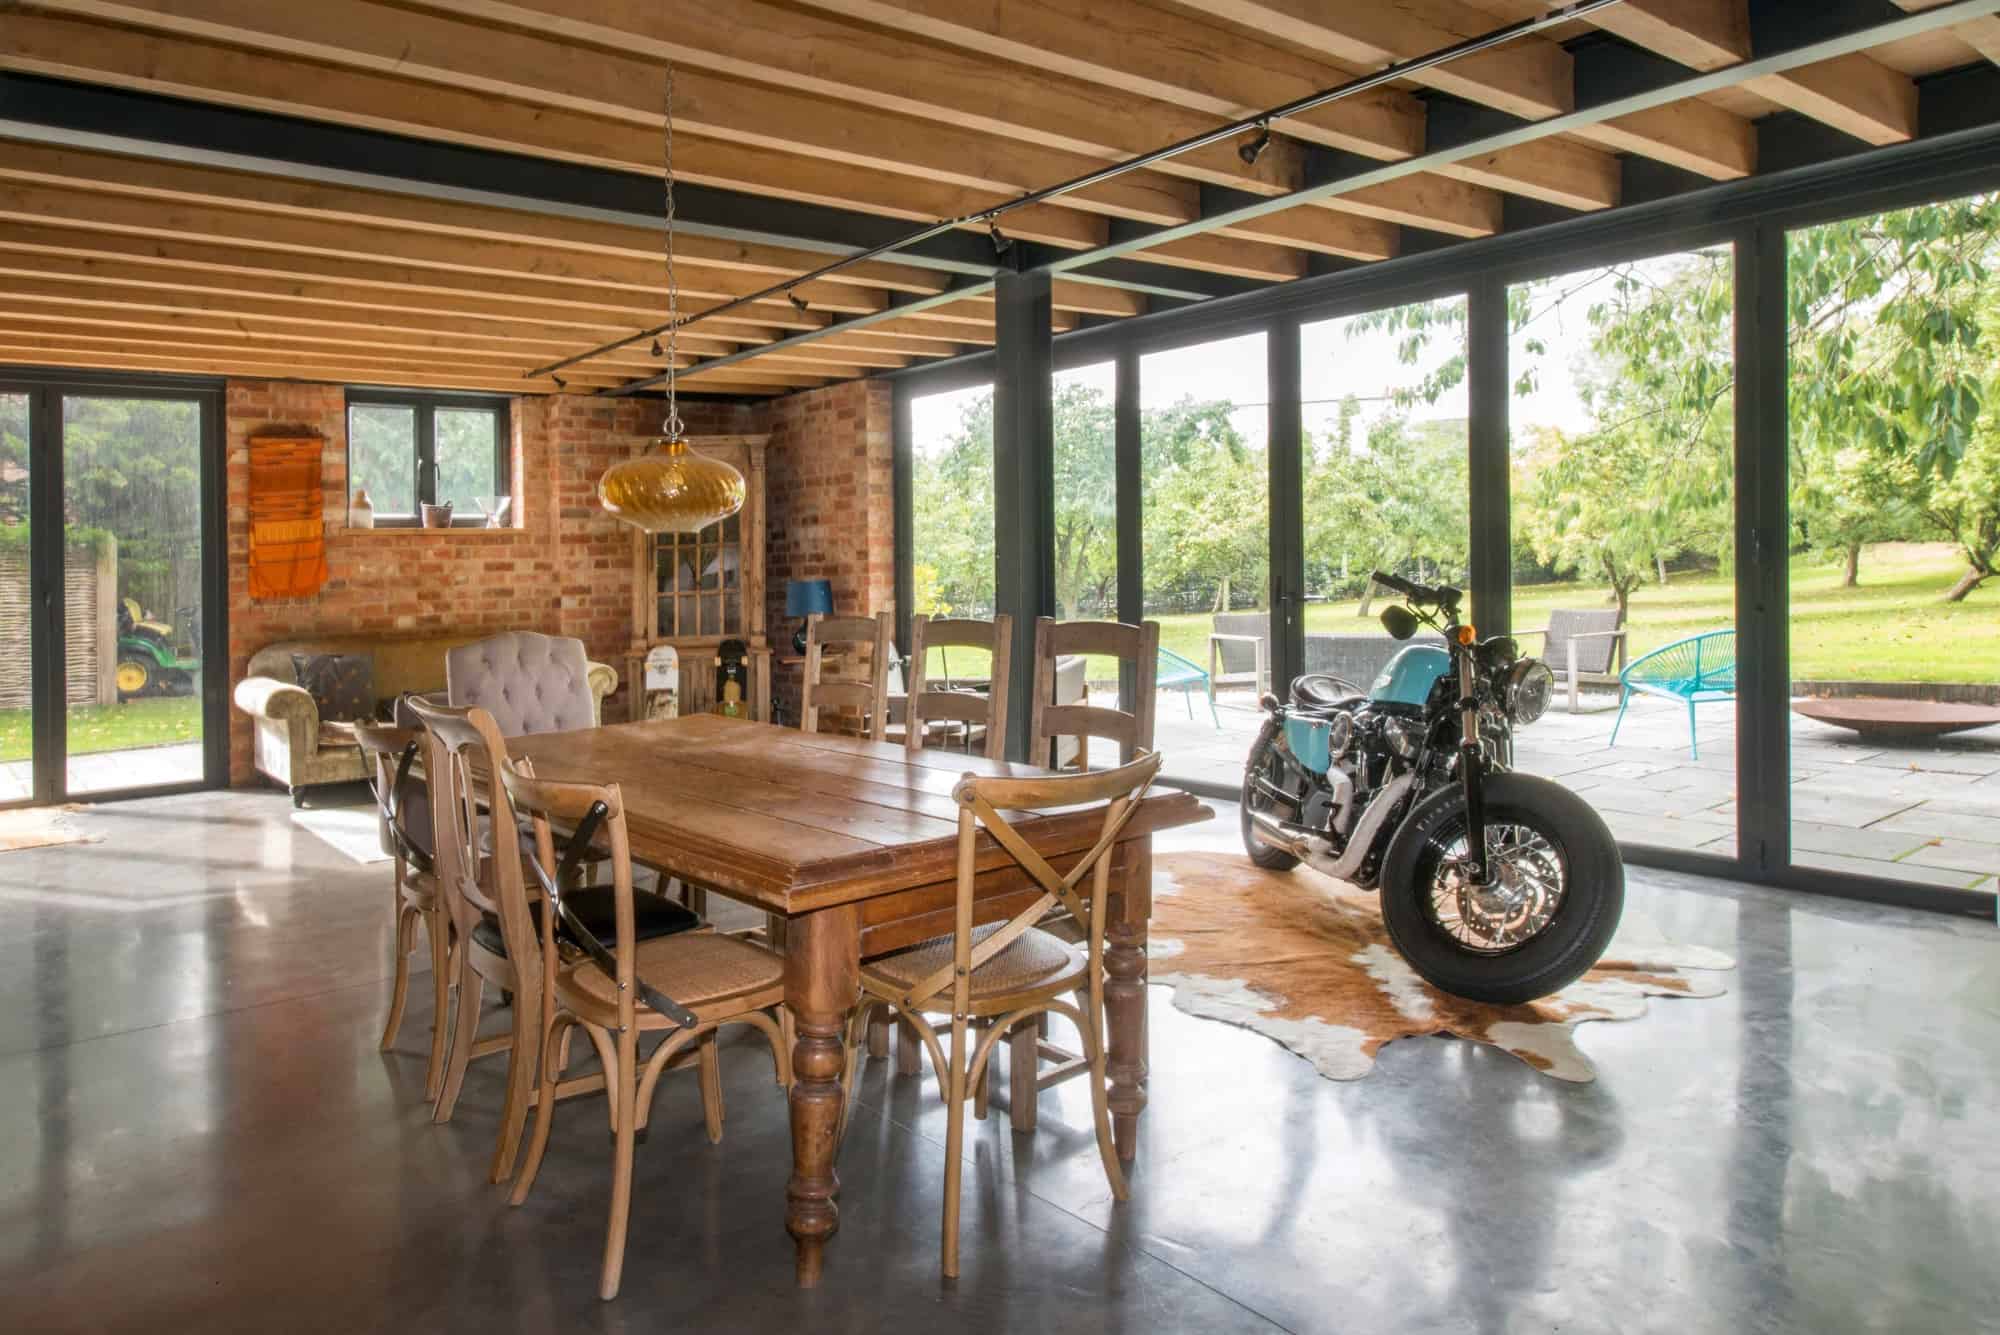 Black Barn LE16 - A contemporary barn converted into a nordic style home with polished concrete floors, double height ceilings and set in 2.5 acres - The Location Guys